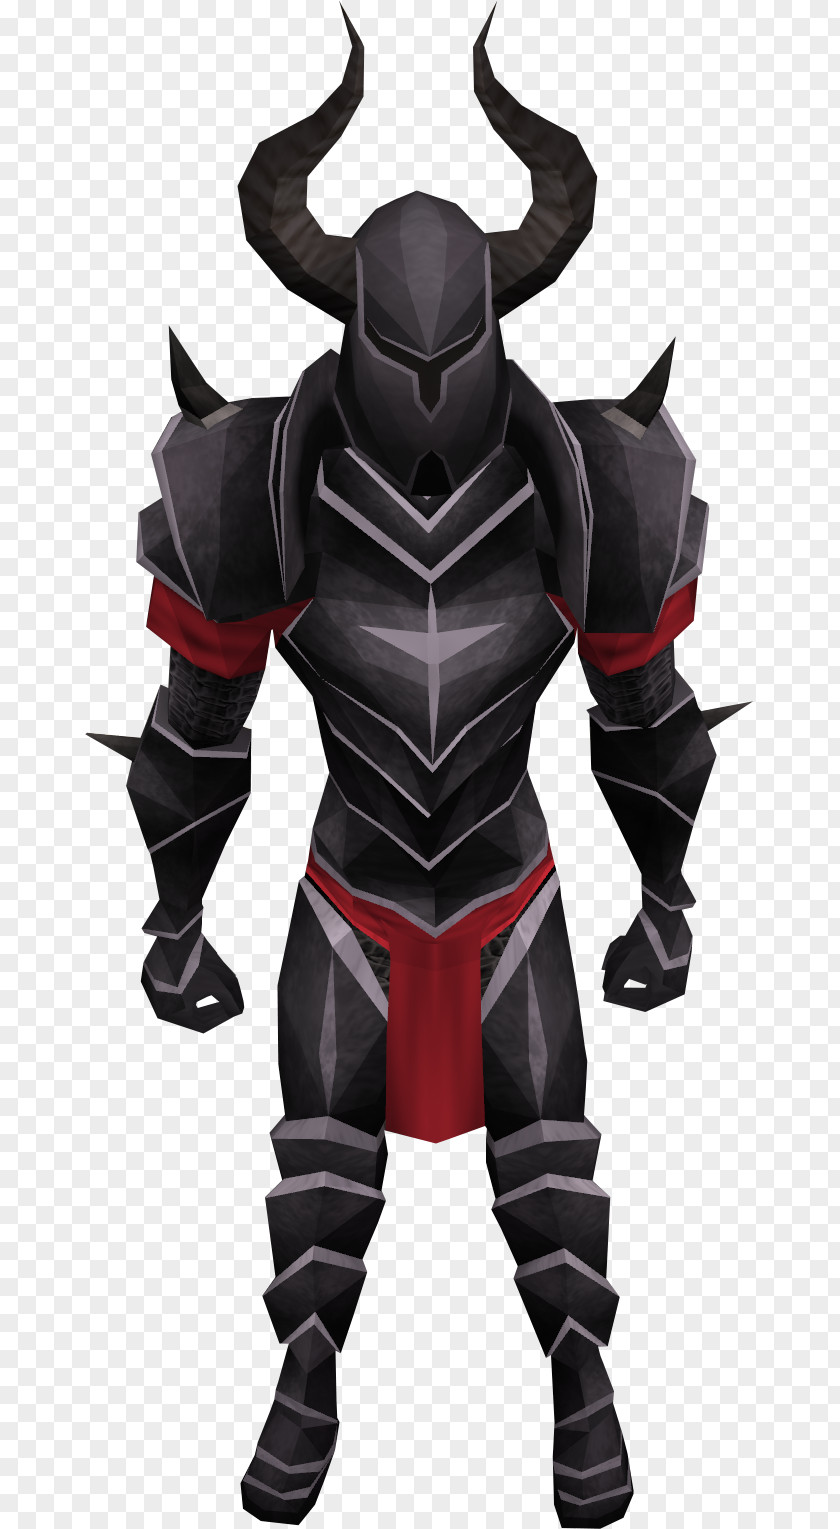 Knight Black Satellite Conspiracy Theory RuneScape Armour PNG